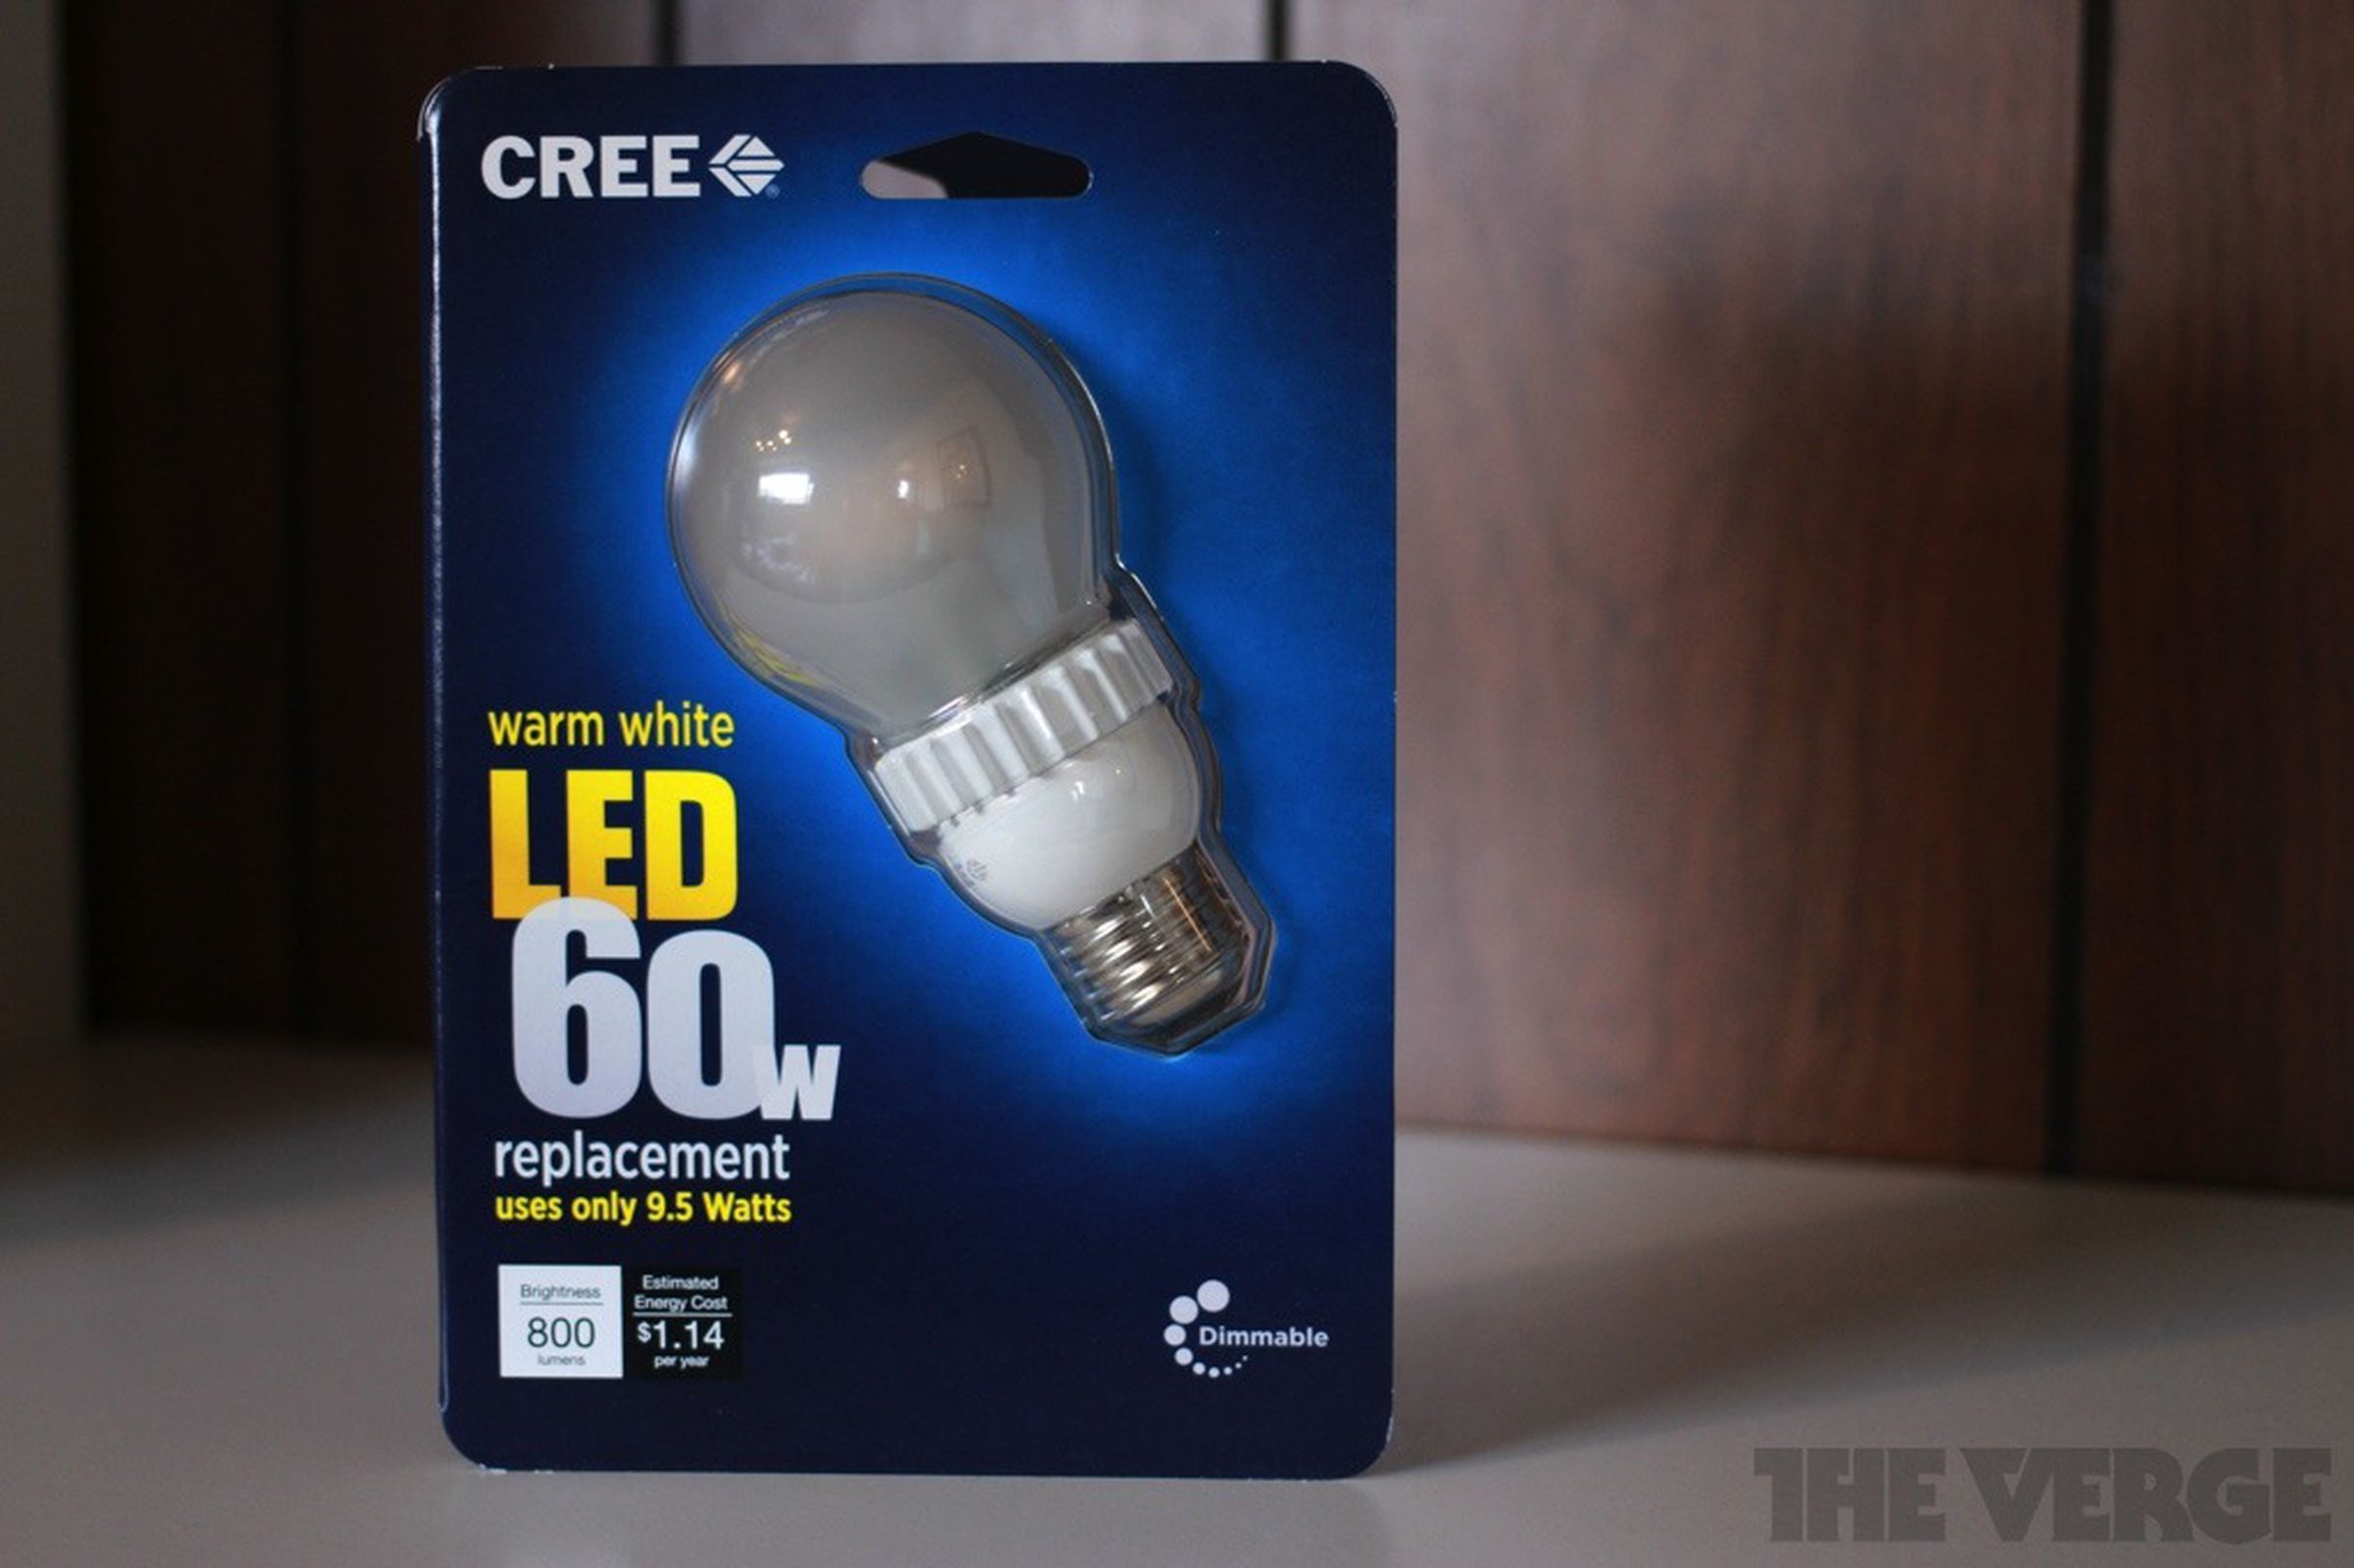 Cree LED light bulb hands-on pictures